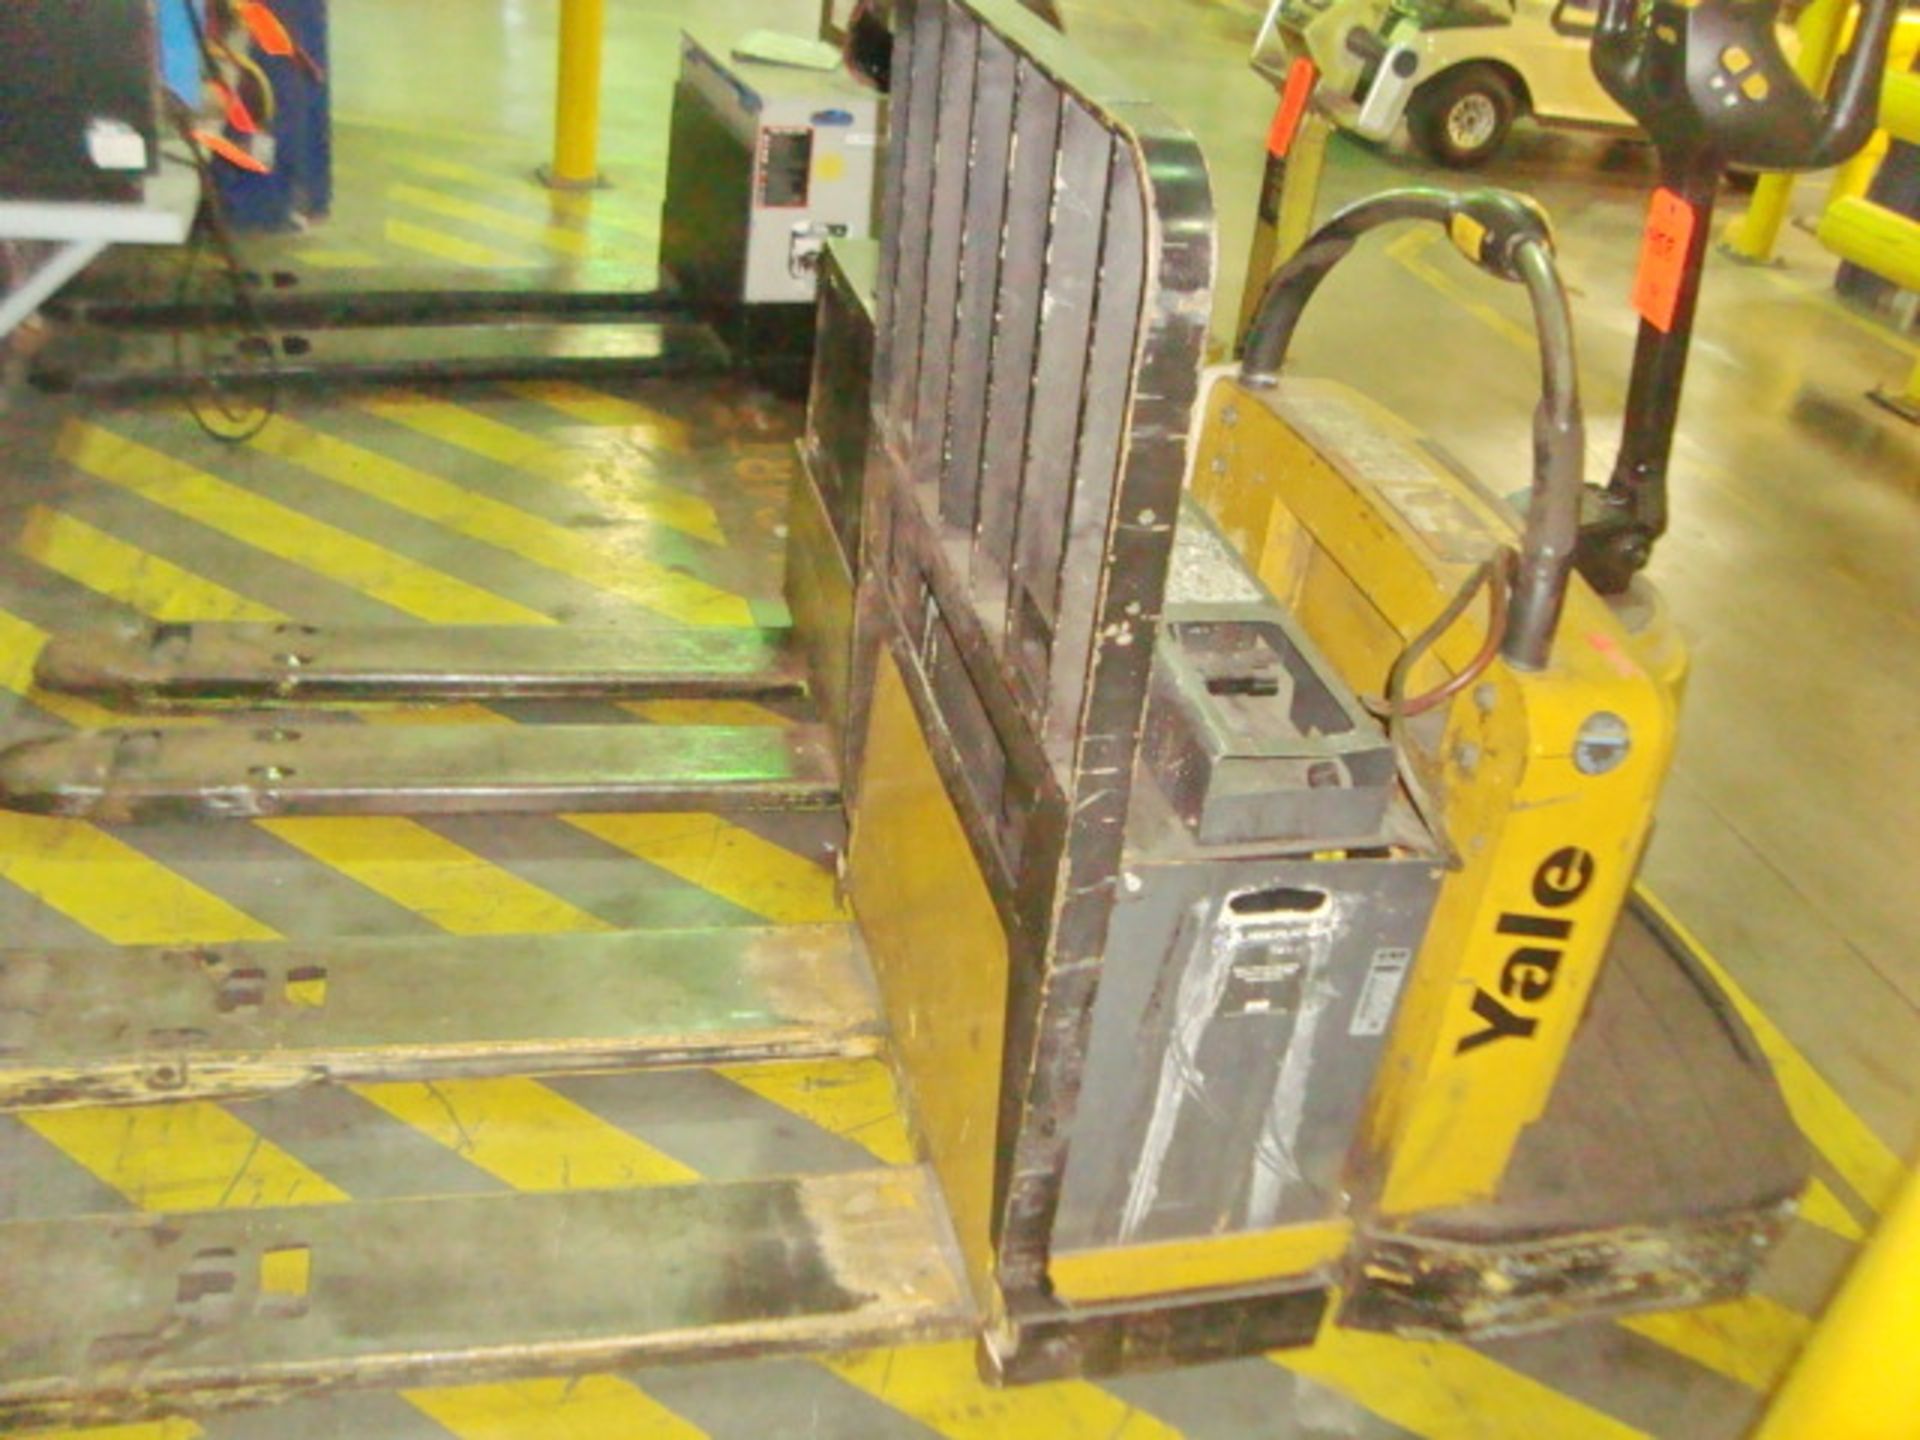 Yale Model MPE060LEN24T2748 6,000 lb. Capacity Worksaver Electric Stand Up Riding Lift Truck, 24V. - Image 3 of 6